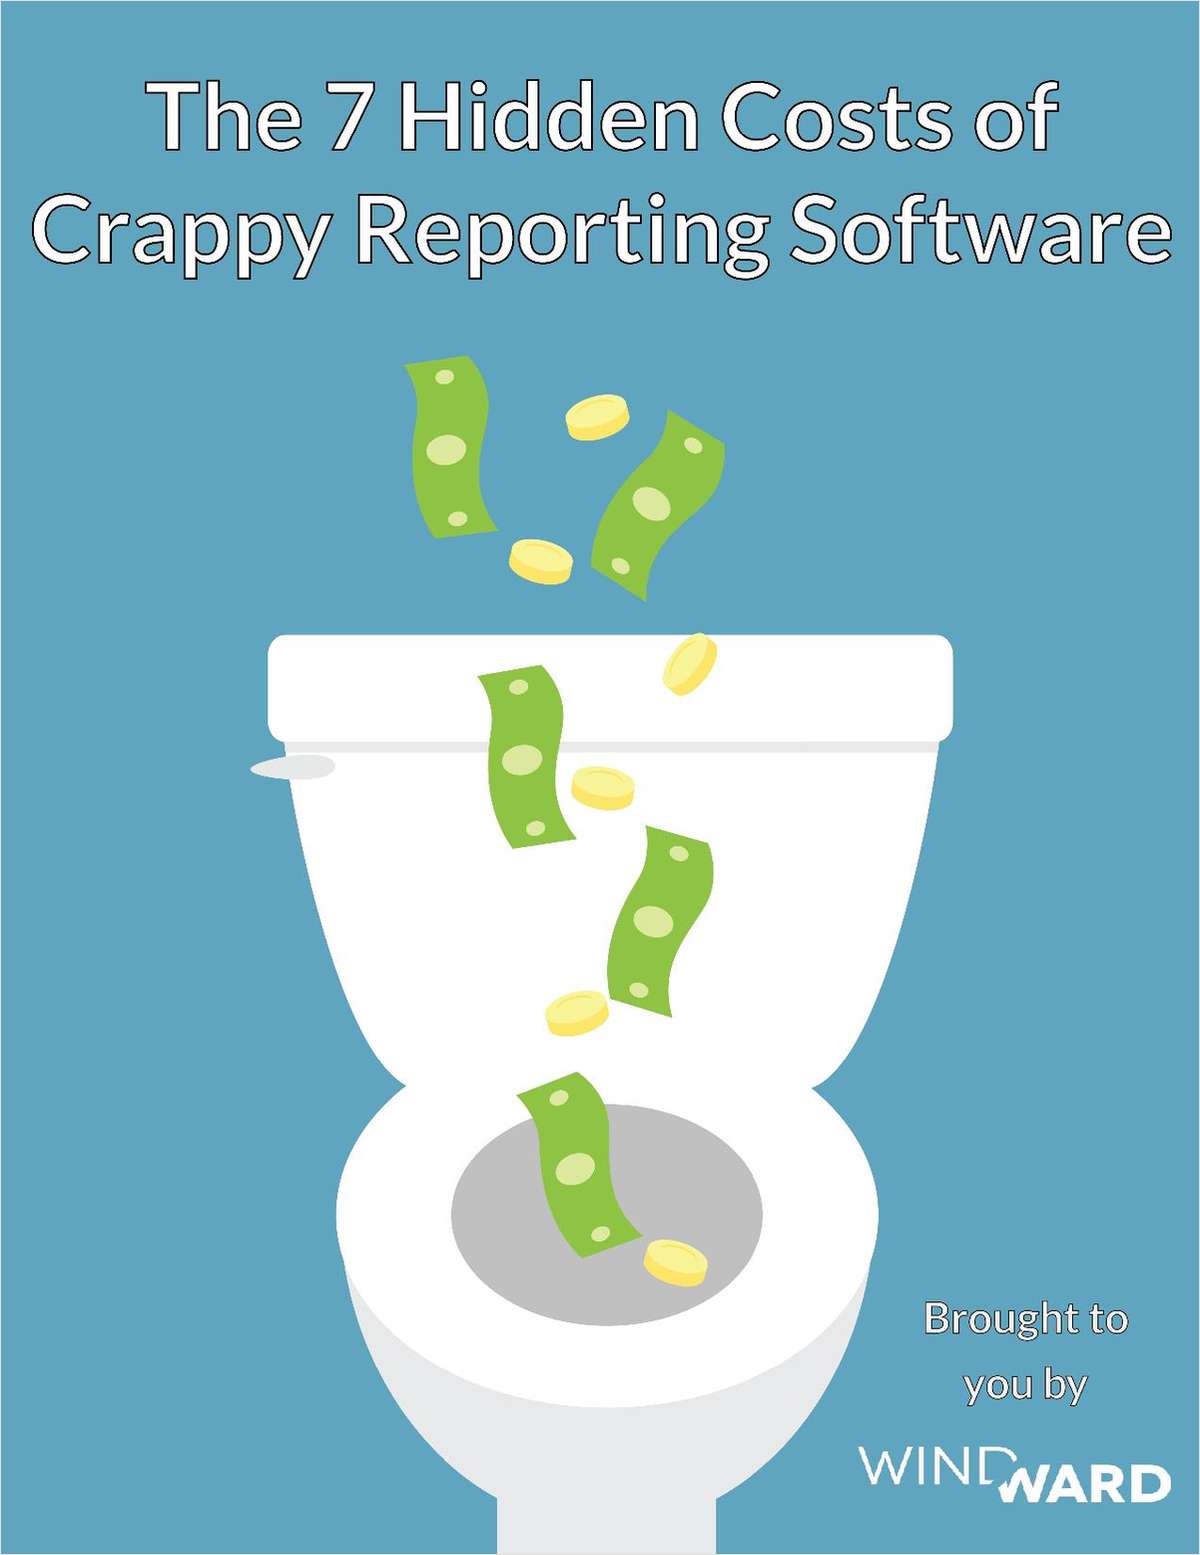 The 7 Hidden Costs of Crappy Reporting Software